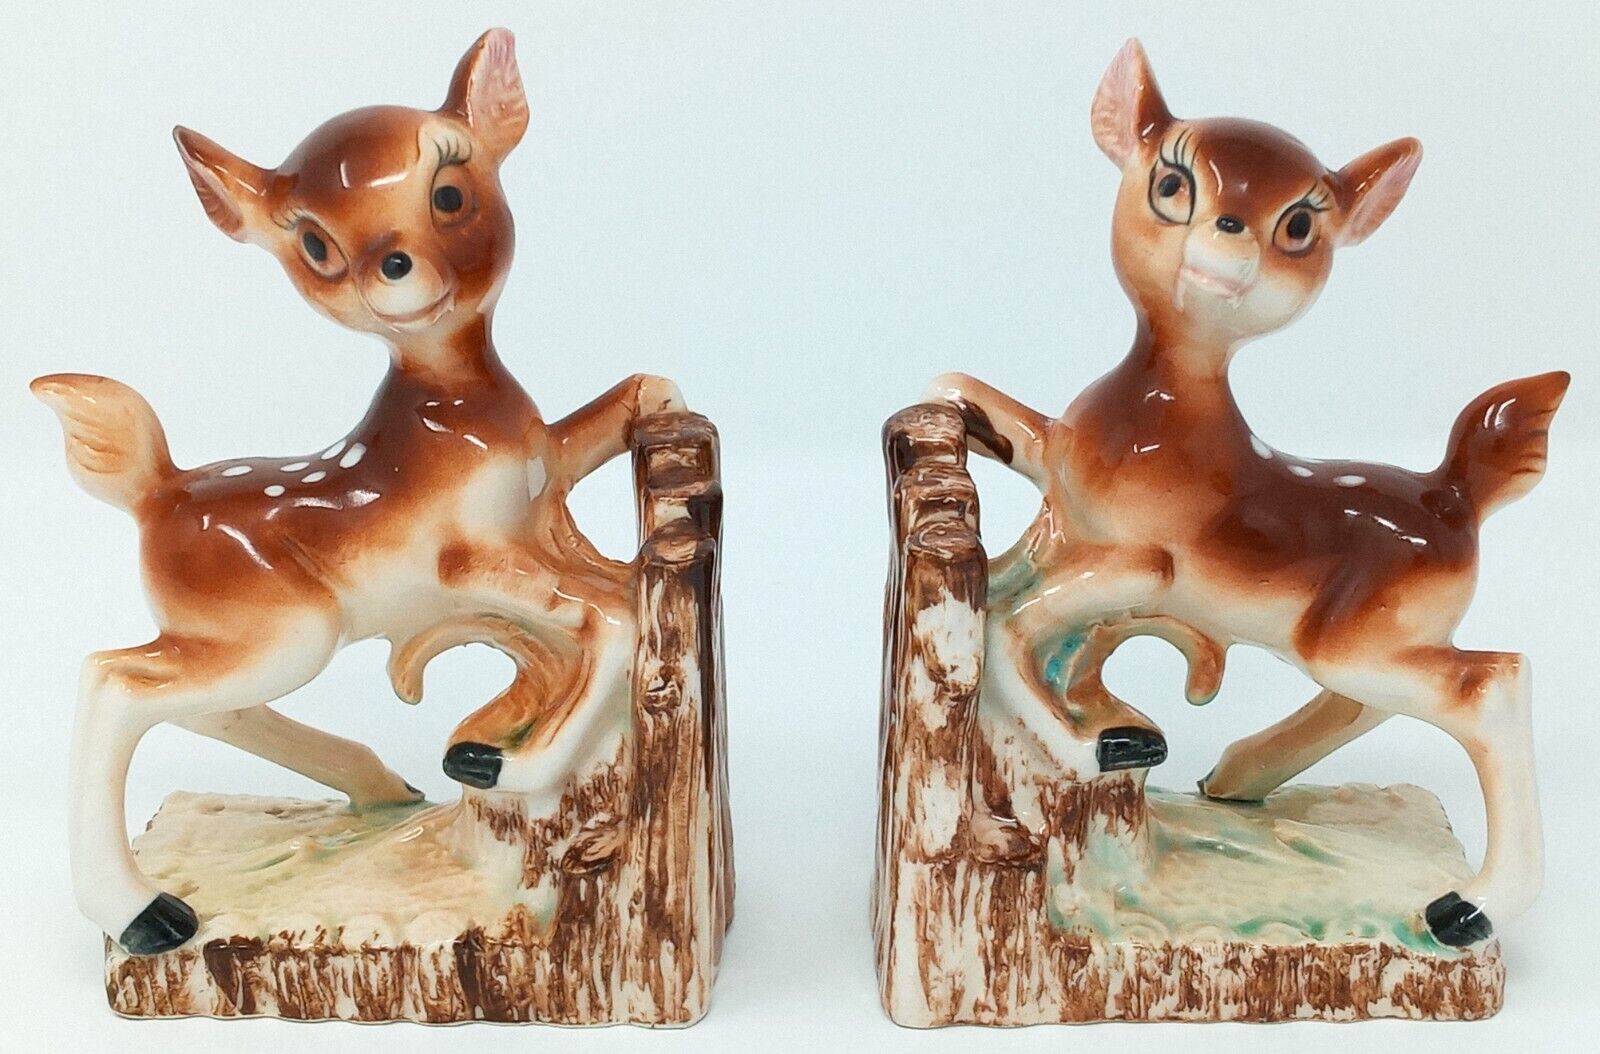 Pair of Rare vintage 1950s or 1960s Deer fawn Ceramic Bookends decorative kitsch